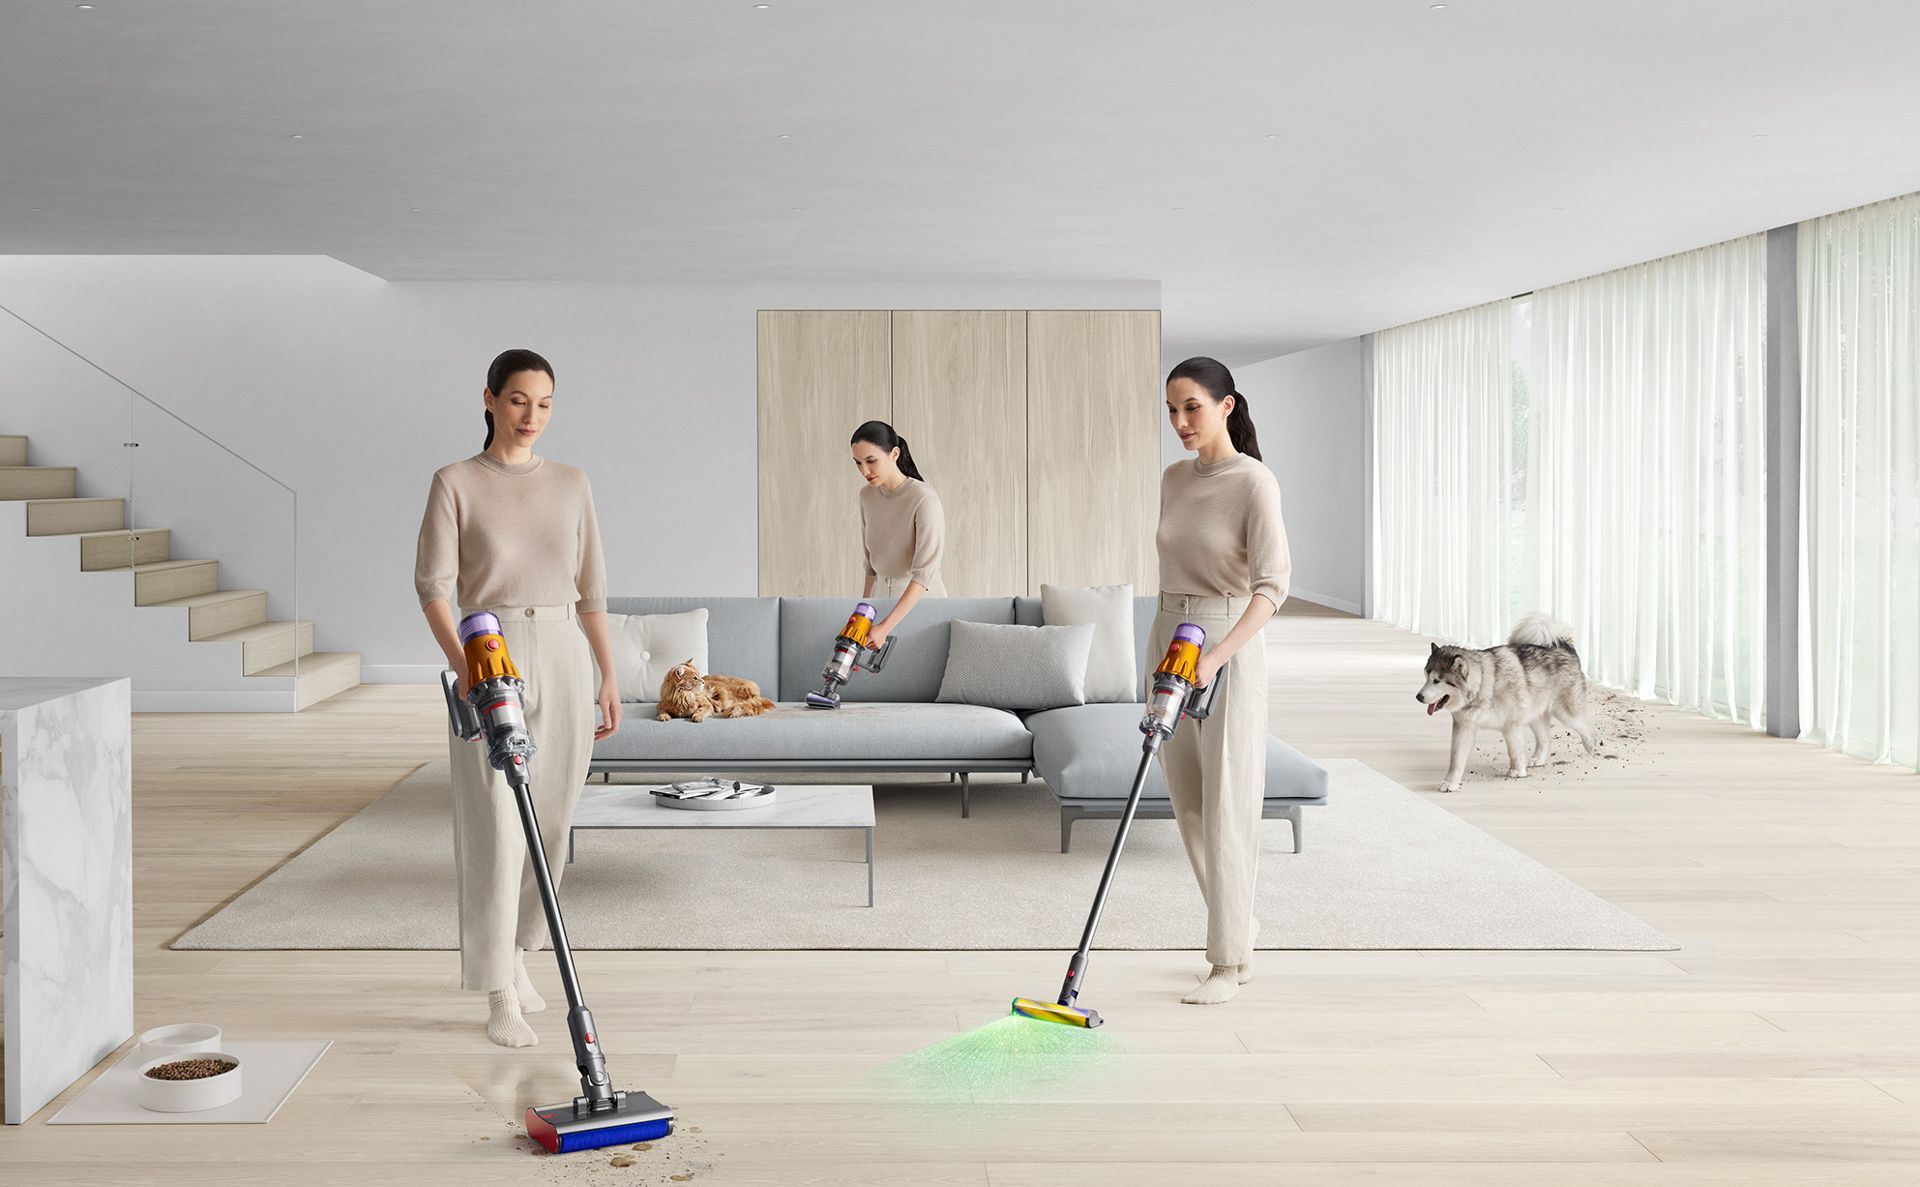 Buy Dyson V8 Absolute Cordless Vacuum Cleaner (115 AW) Online in Dubai &  the UAE